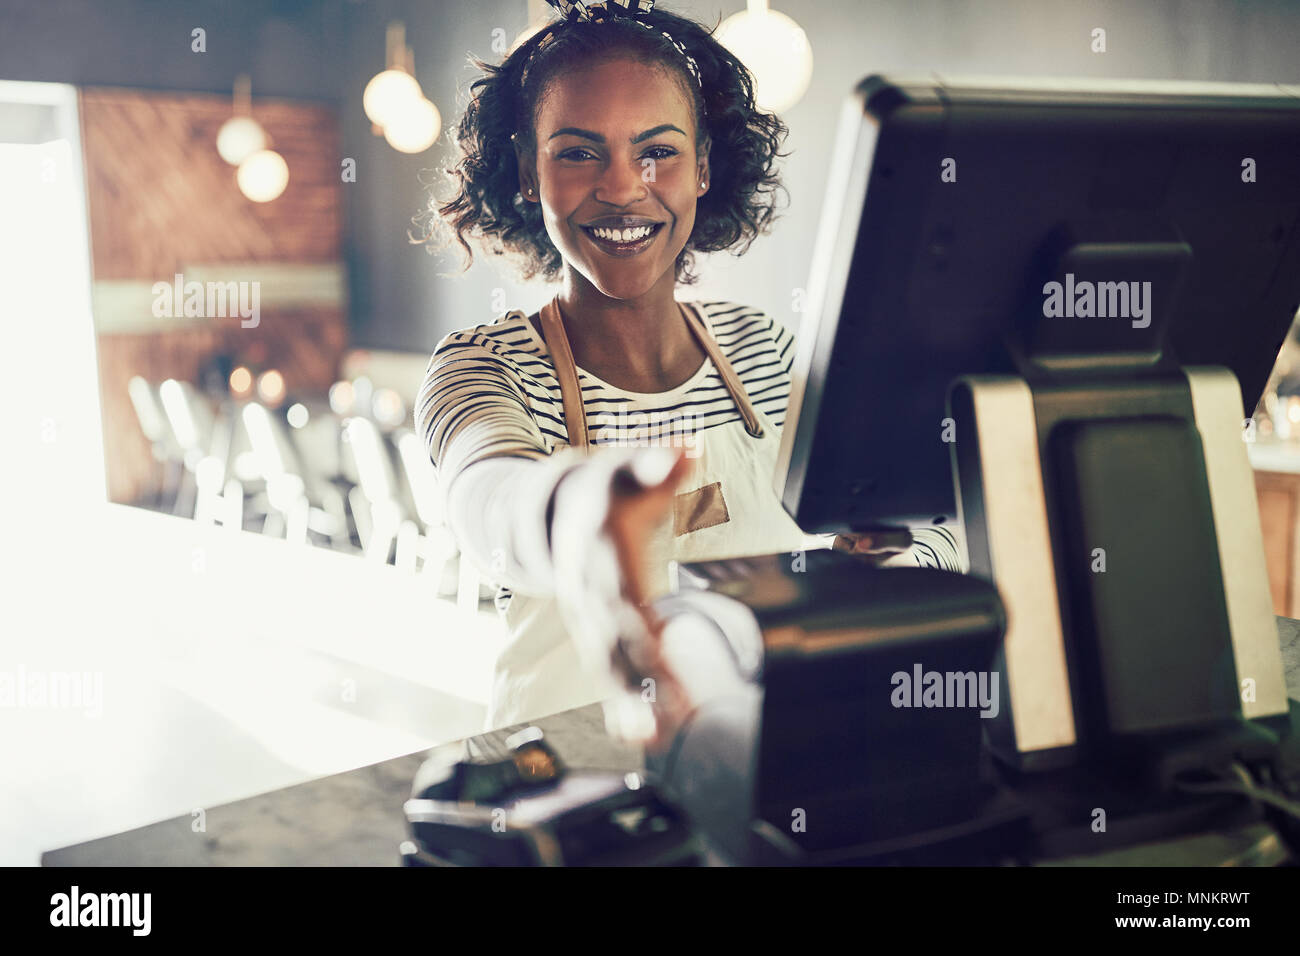 Smiling young African cafe owner standing at a point of sale terminal in her restaurant extending a handshake Stock Photo